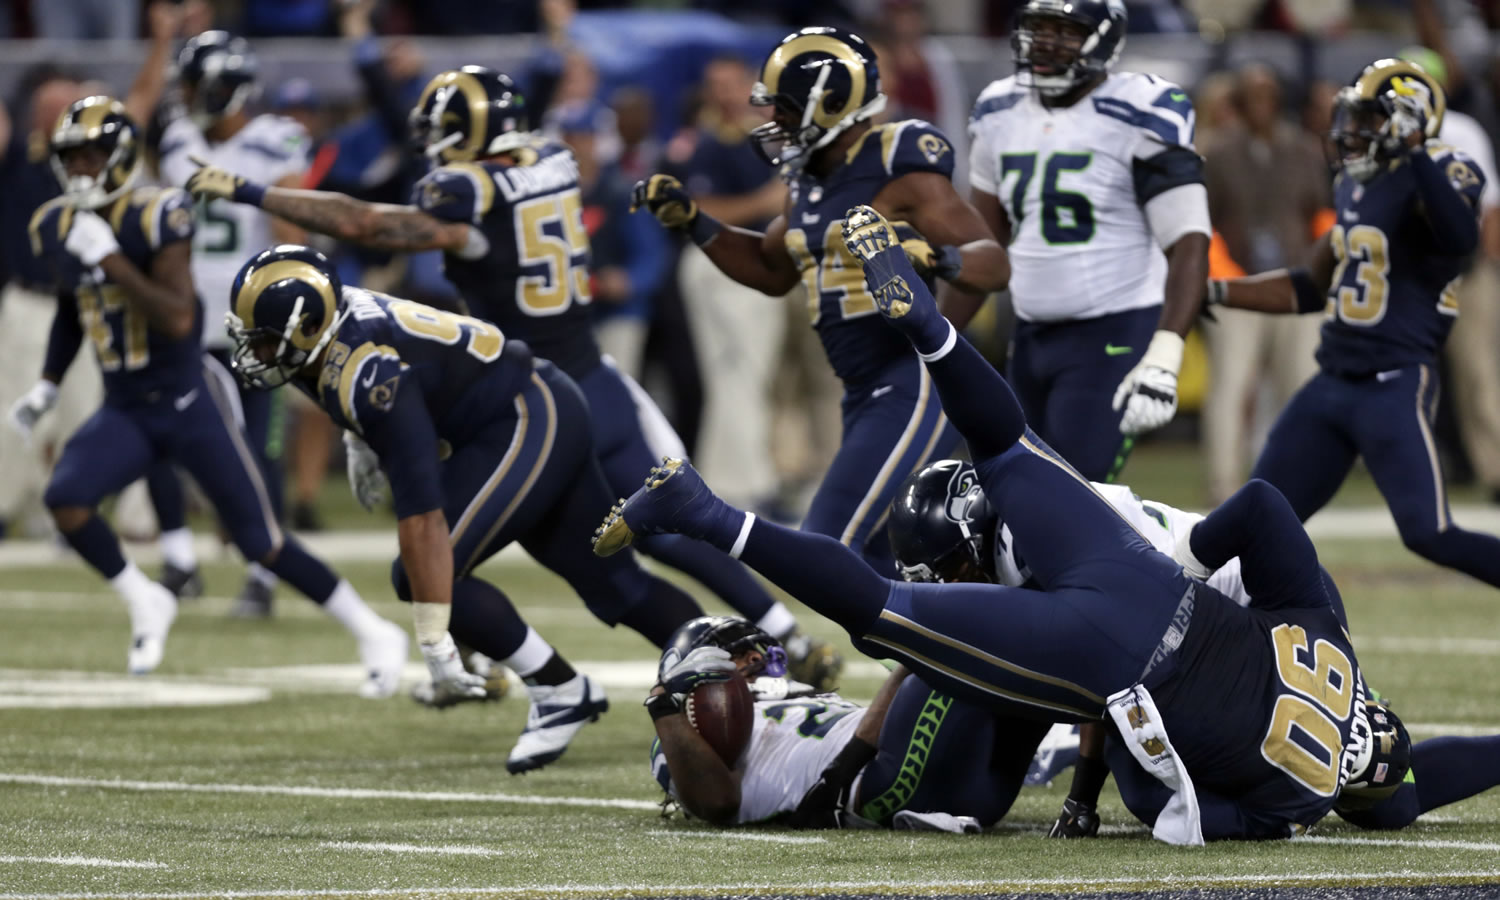 Seattle Seahawks running back Marshawn Lynch lands on his back as he is stopped on fourth down and St. Louis Rams players celebrate on the final play in overtime of an NFL football game Sunday, Sept. 13, 2015, in St. Louis. The Rams won 34-31.